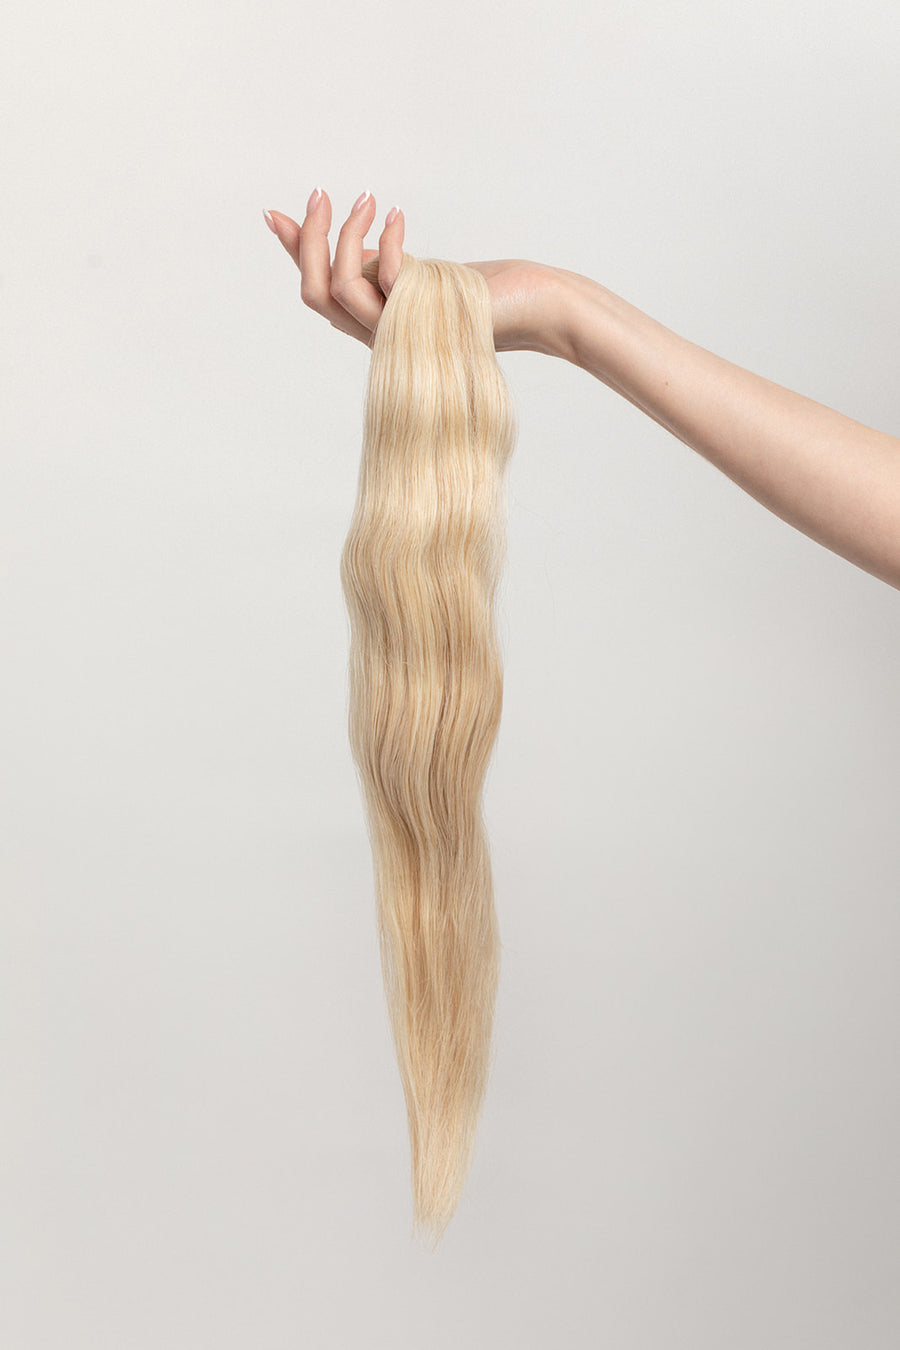 Honey is our dimensional blonde with warm undertones.  Hidden Harloc Clip-In Extensions are made from ethically sourced, Remy Slavic hair. They come with 5 seamless silicone wefts to ensure an undetectable result that is comfortable to wear. Whether you are looking to add volume or length, a stunning look for a special event, or just want to look and feel gorgeous. Available in 10 of our beautiful shades.